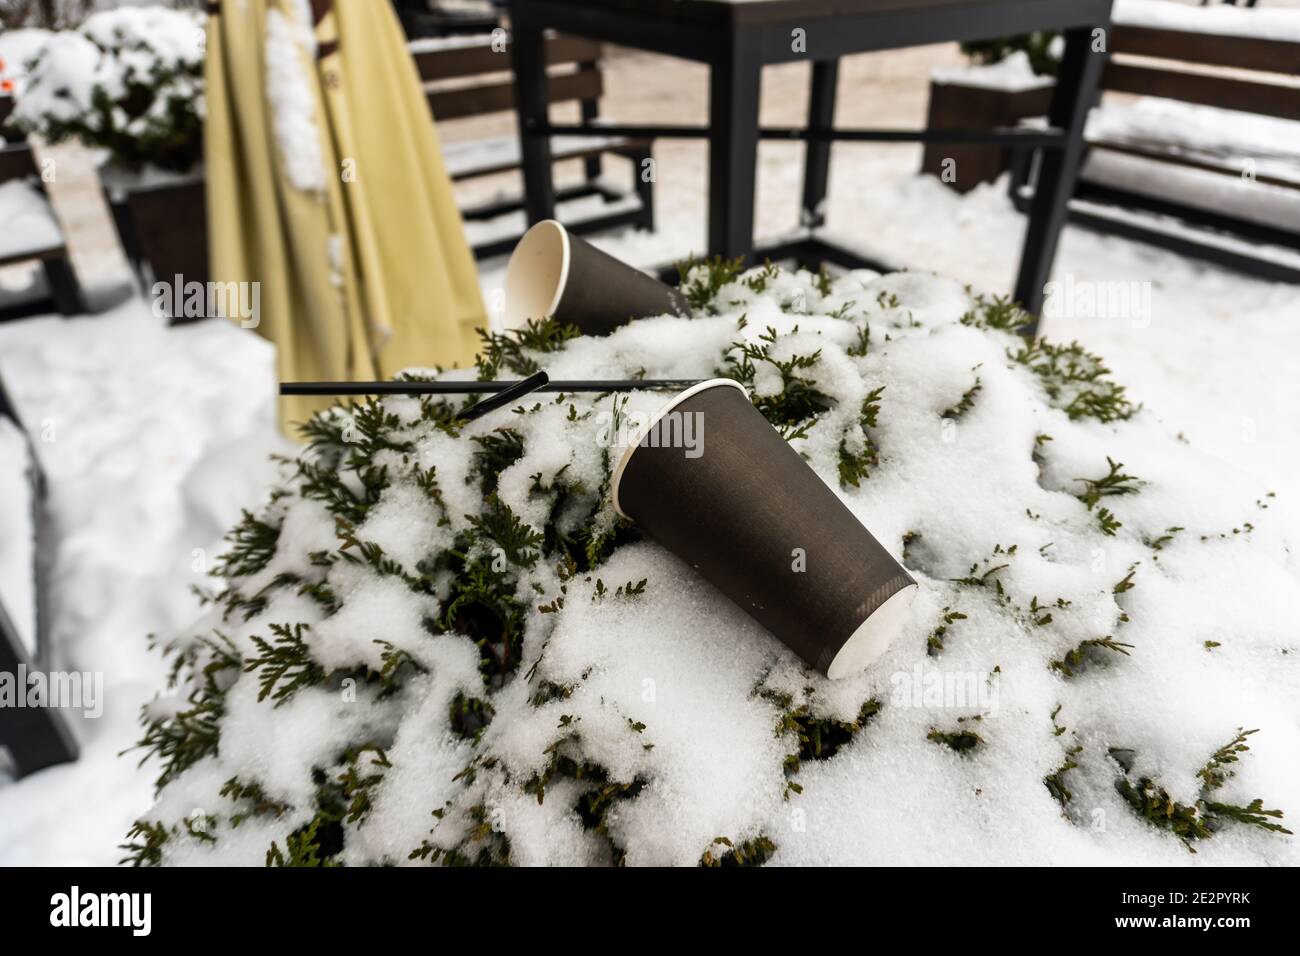 Cups and straws for coffee and tea are lying on a green bush covered with snow near an outdoor cafe in winter Stock Photo